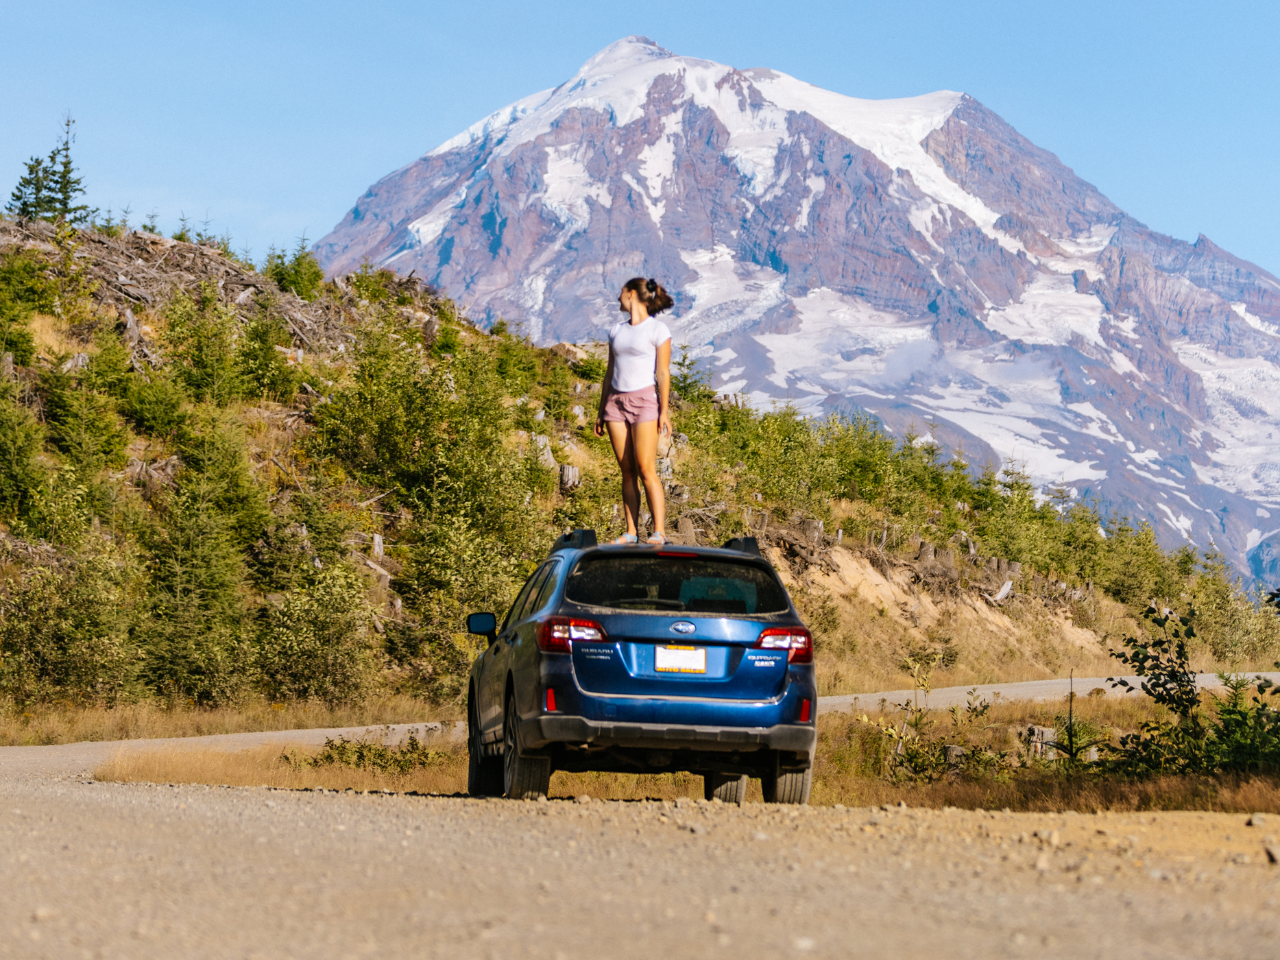 Woman standing on Subaru Outback looking at mountains